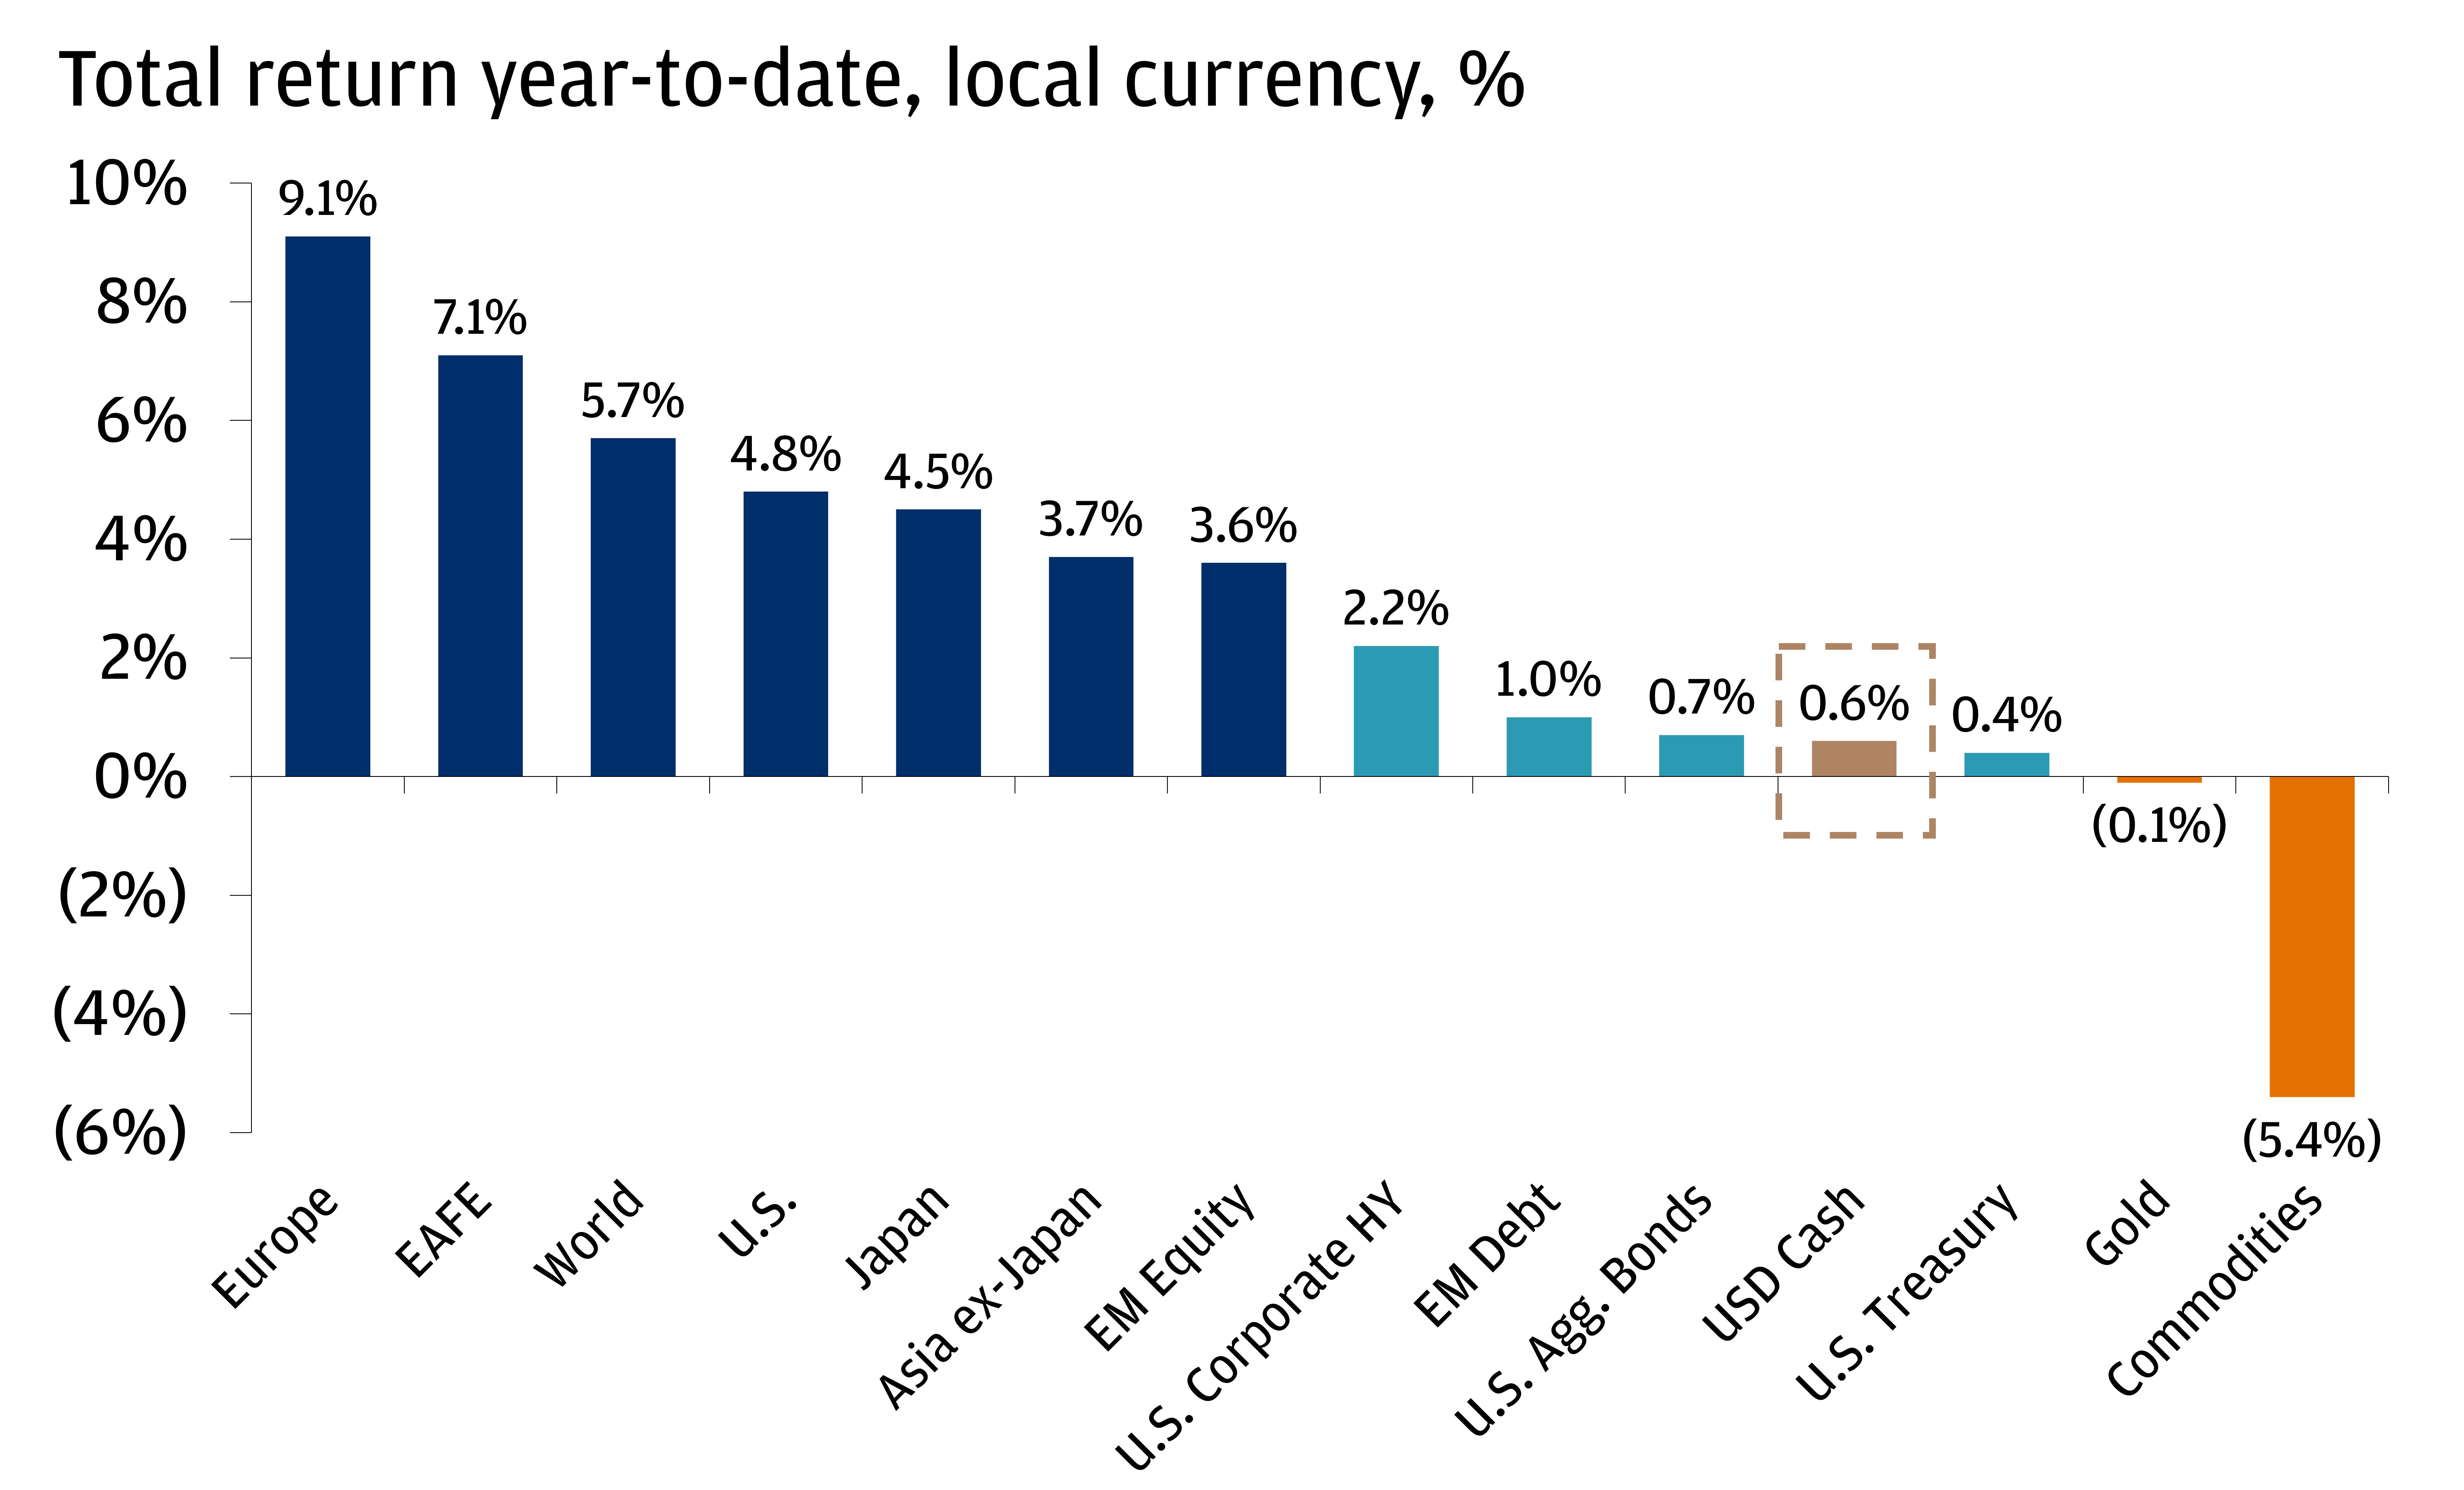 This bar chart shows the total return of assets year-to-date (in local currency, %).